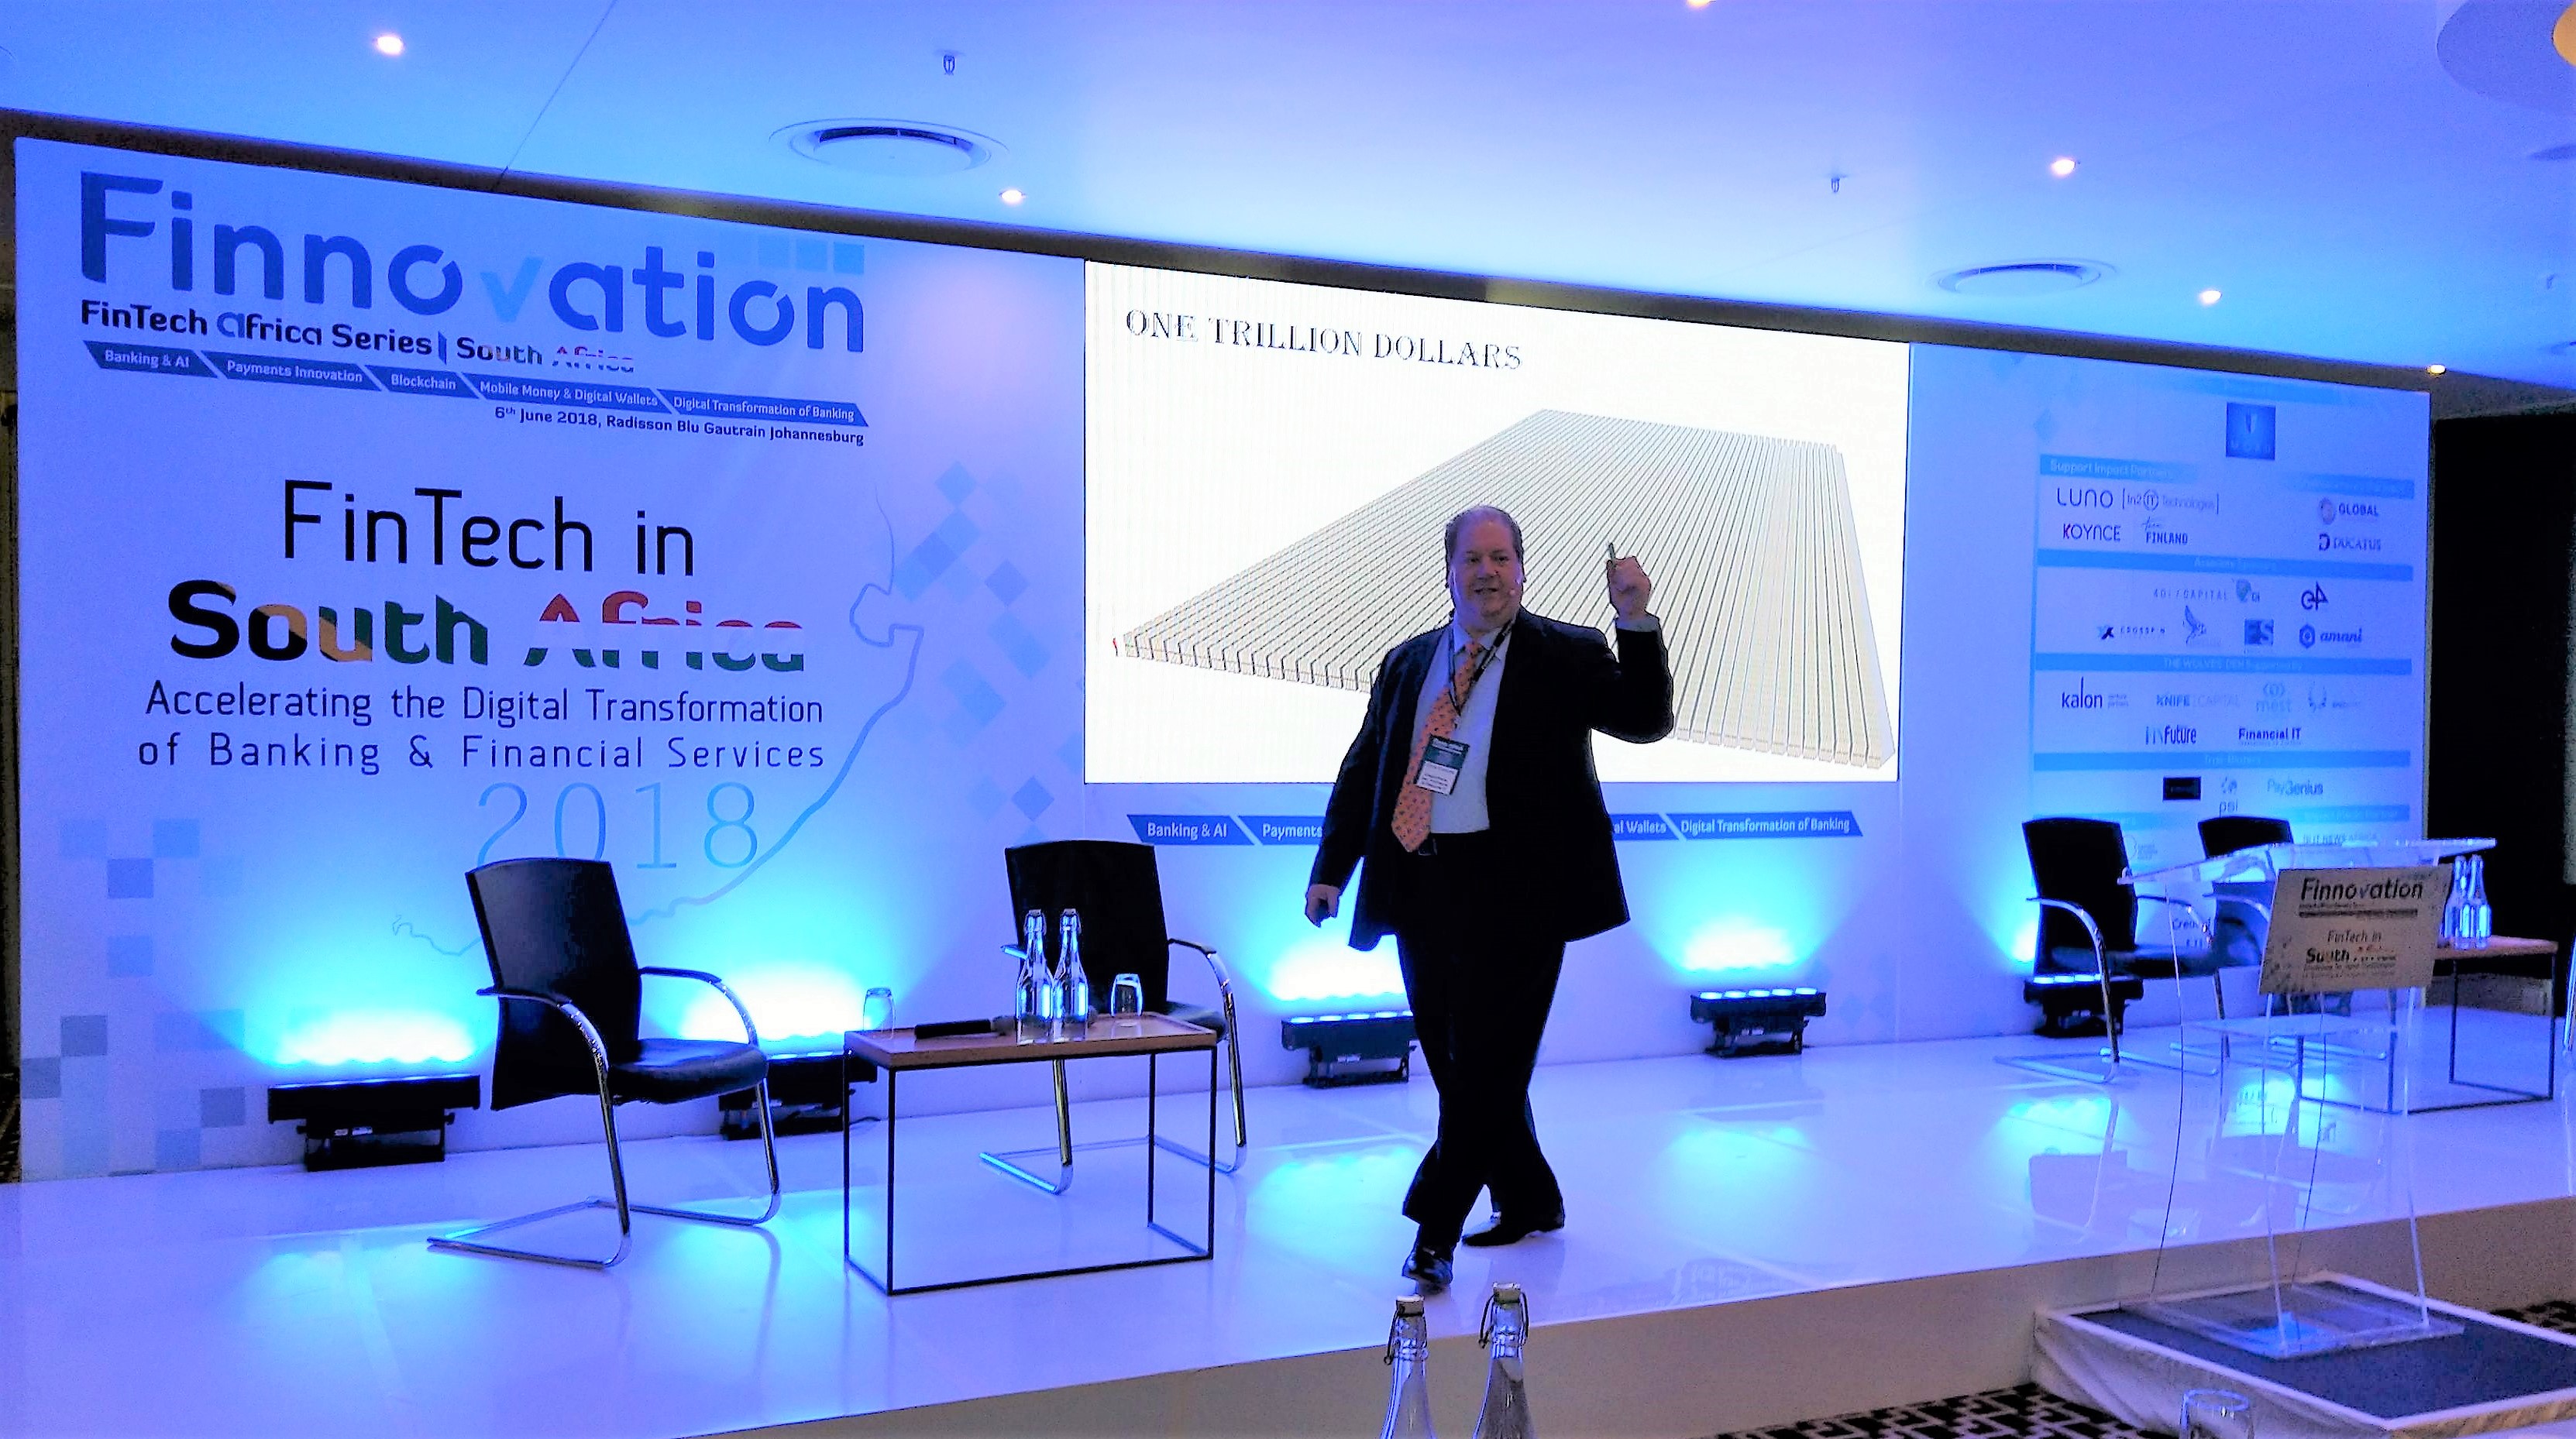  More Than 200 International Fintech Pioneers gathered at Finnovation South Africa 2018 to Accelerate Digital Innovations